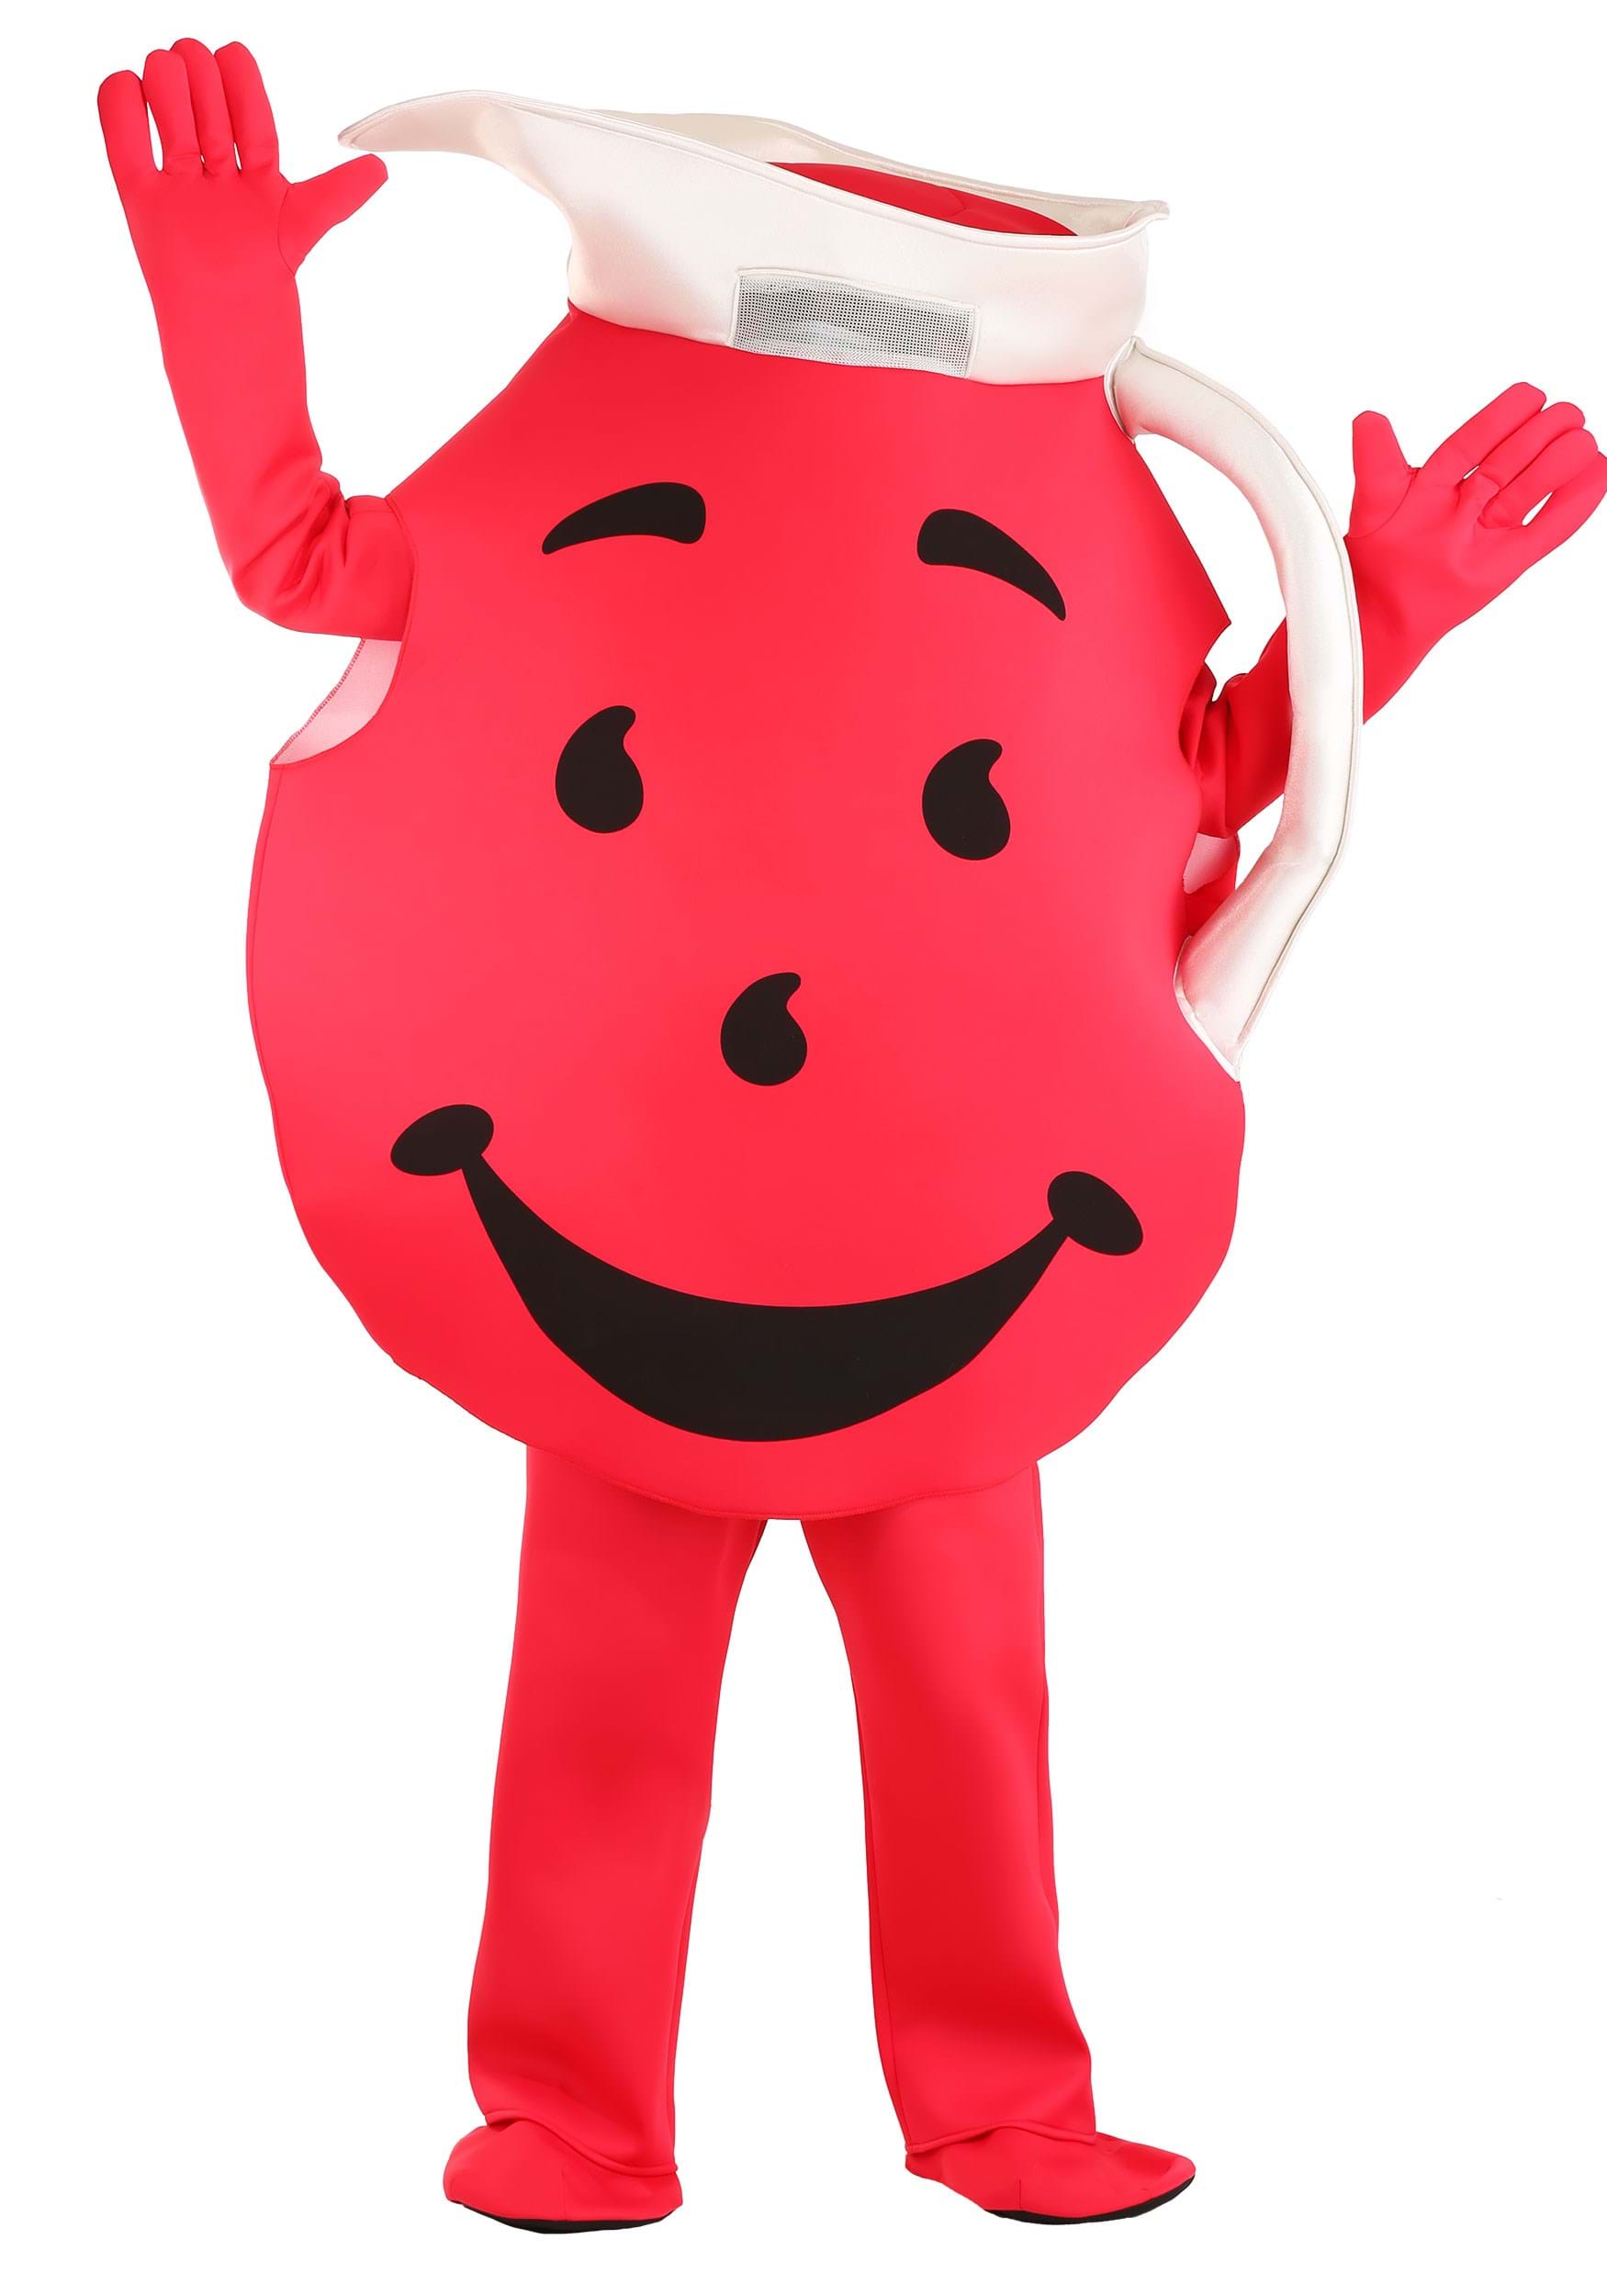 Image of Morris Costumes Adult Kool-Aid Deluxe Costume | Funny Adult Costumes